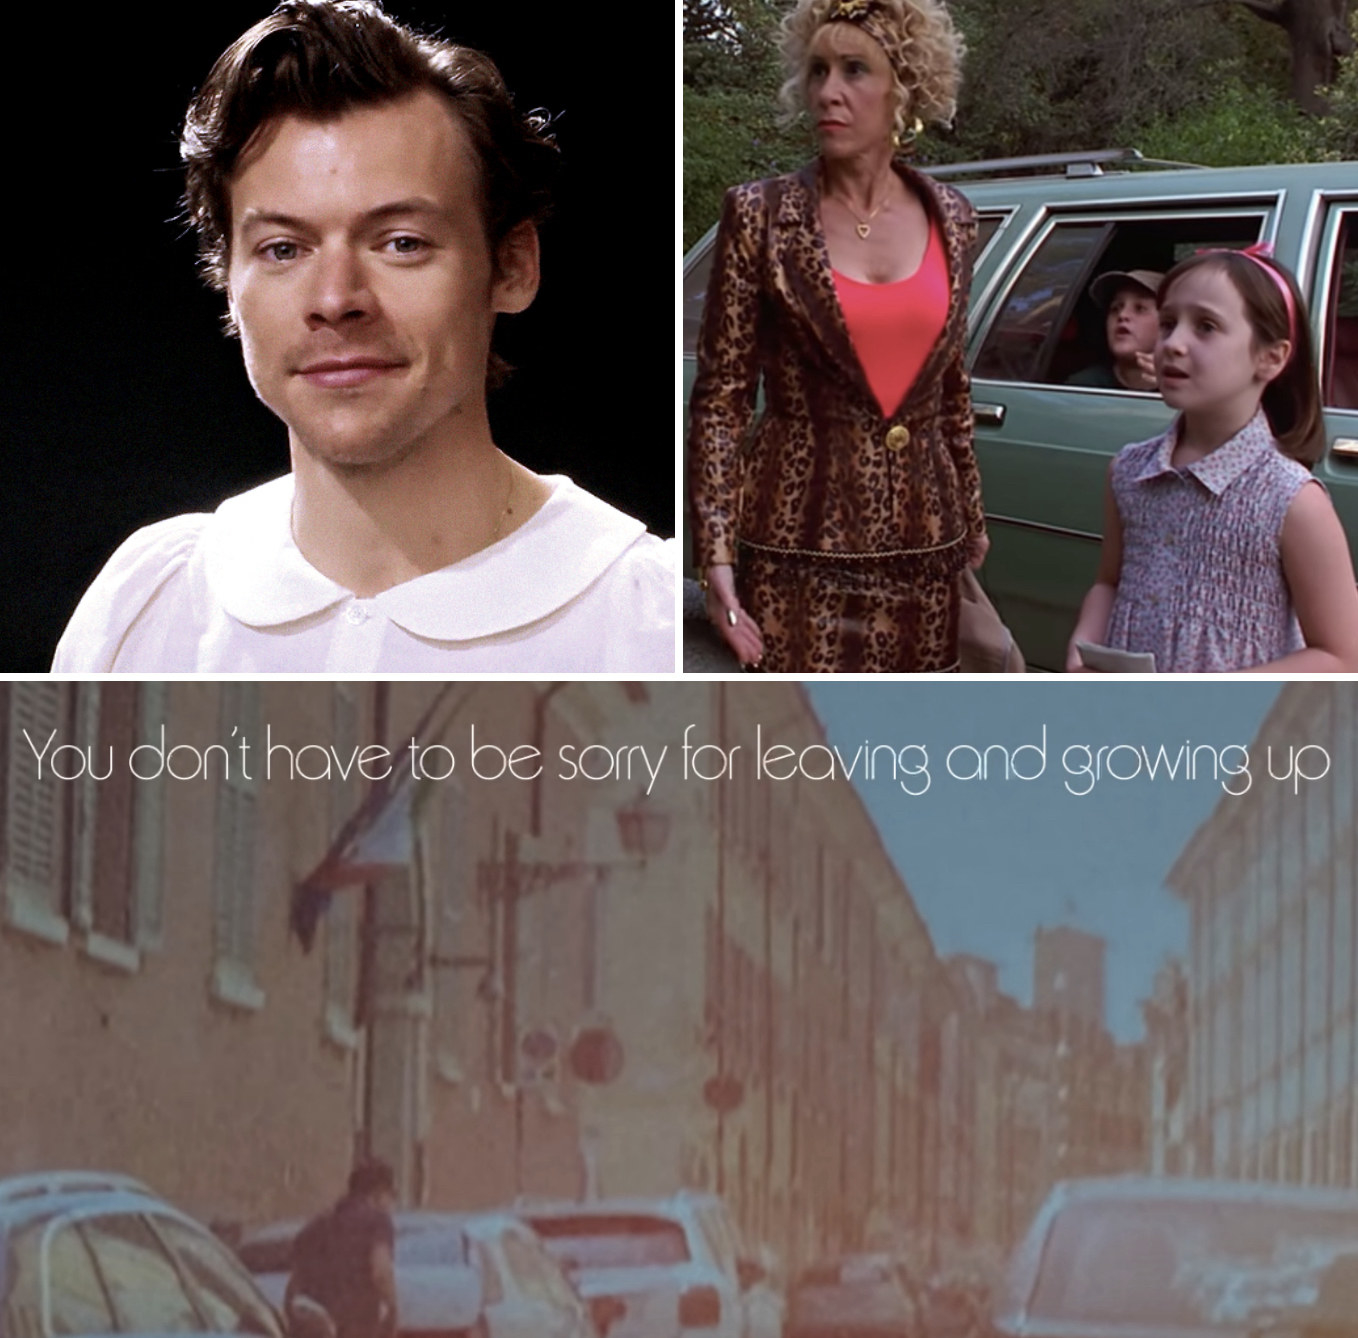 Styles in a promo for &quot;Harry&#x27;s House&quot; next to Matilda and Mrs. Wormwood from &quot;Matilda&quot;